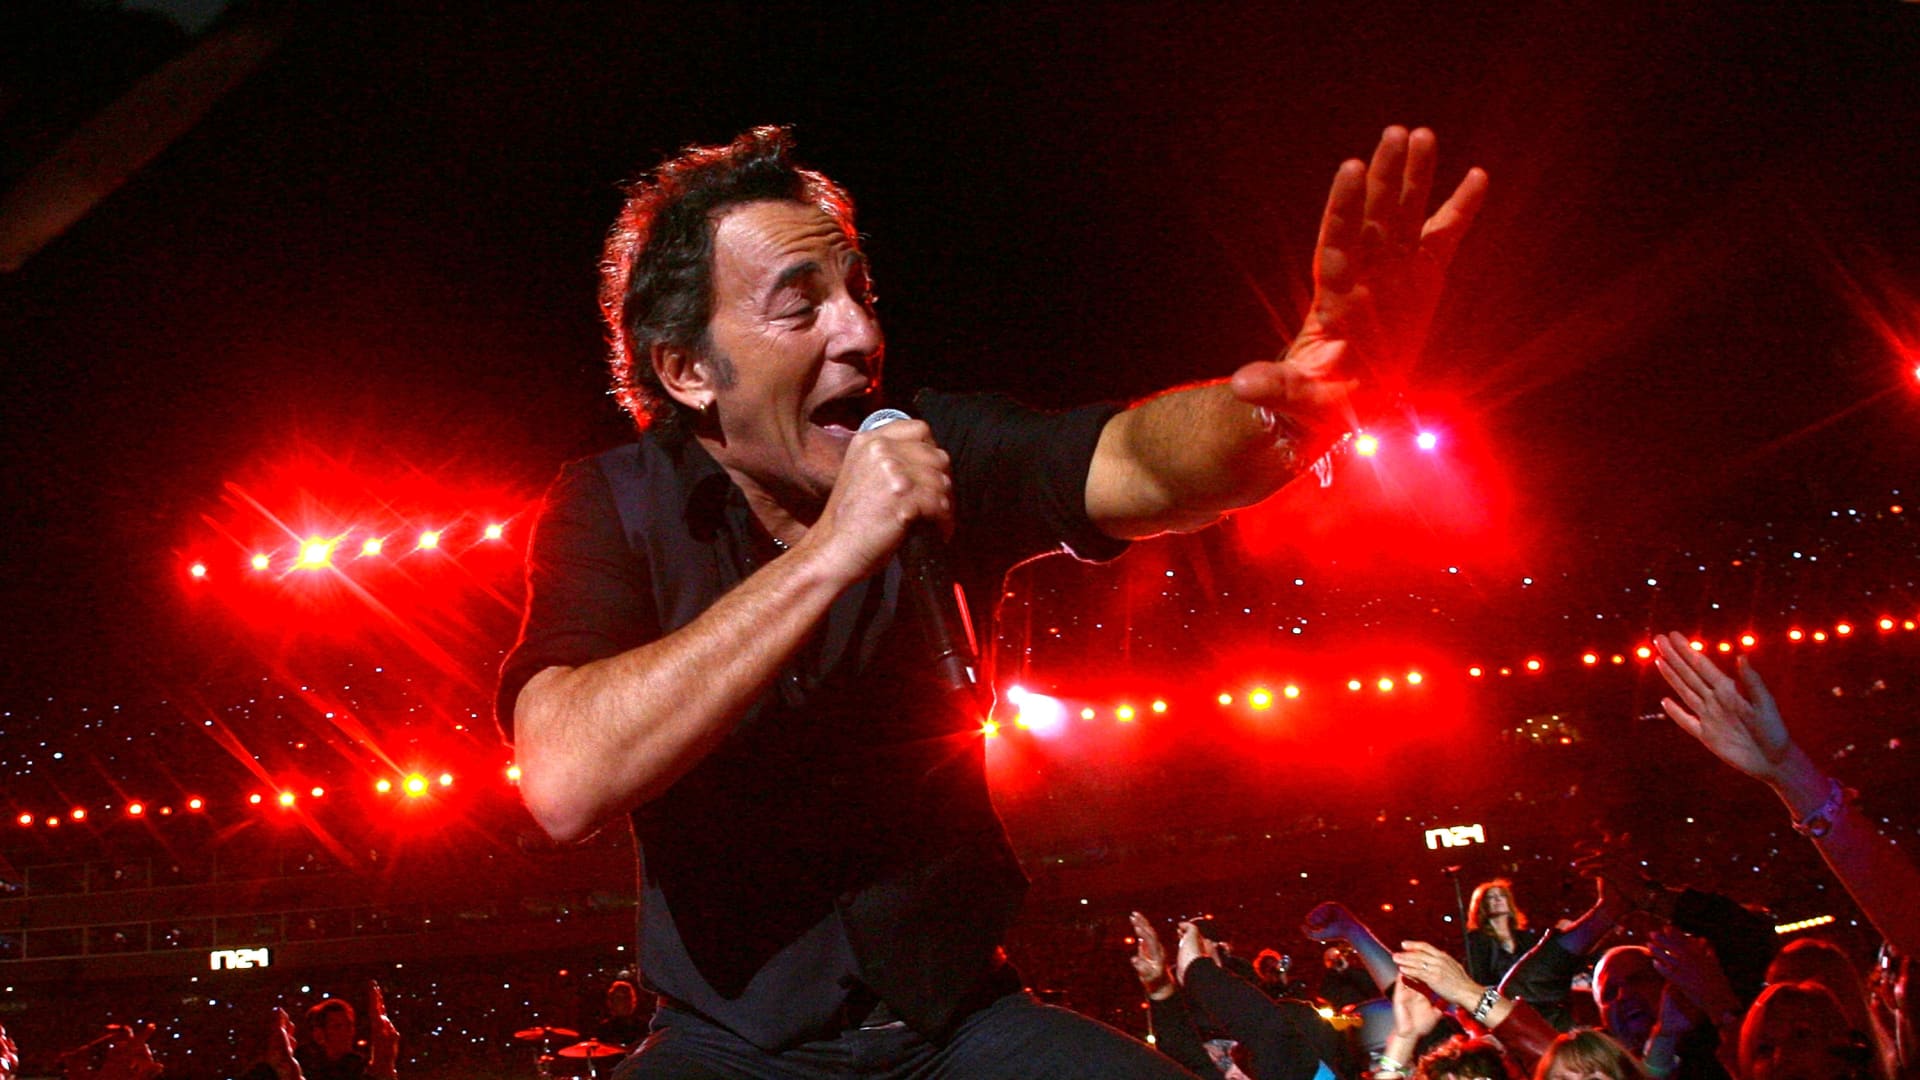 Bruce Springsteen and the E Street Band perform at the Bridgestone halftime show during Super Bowl XLIII between the Arizona Cardinals and the Pittsburgh Steelers on February 1, 2009 at Raymond James Stadium in Tampa, Florida.